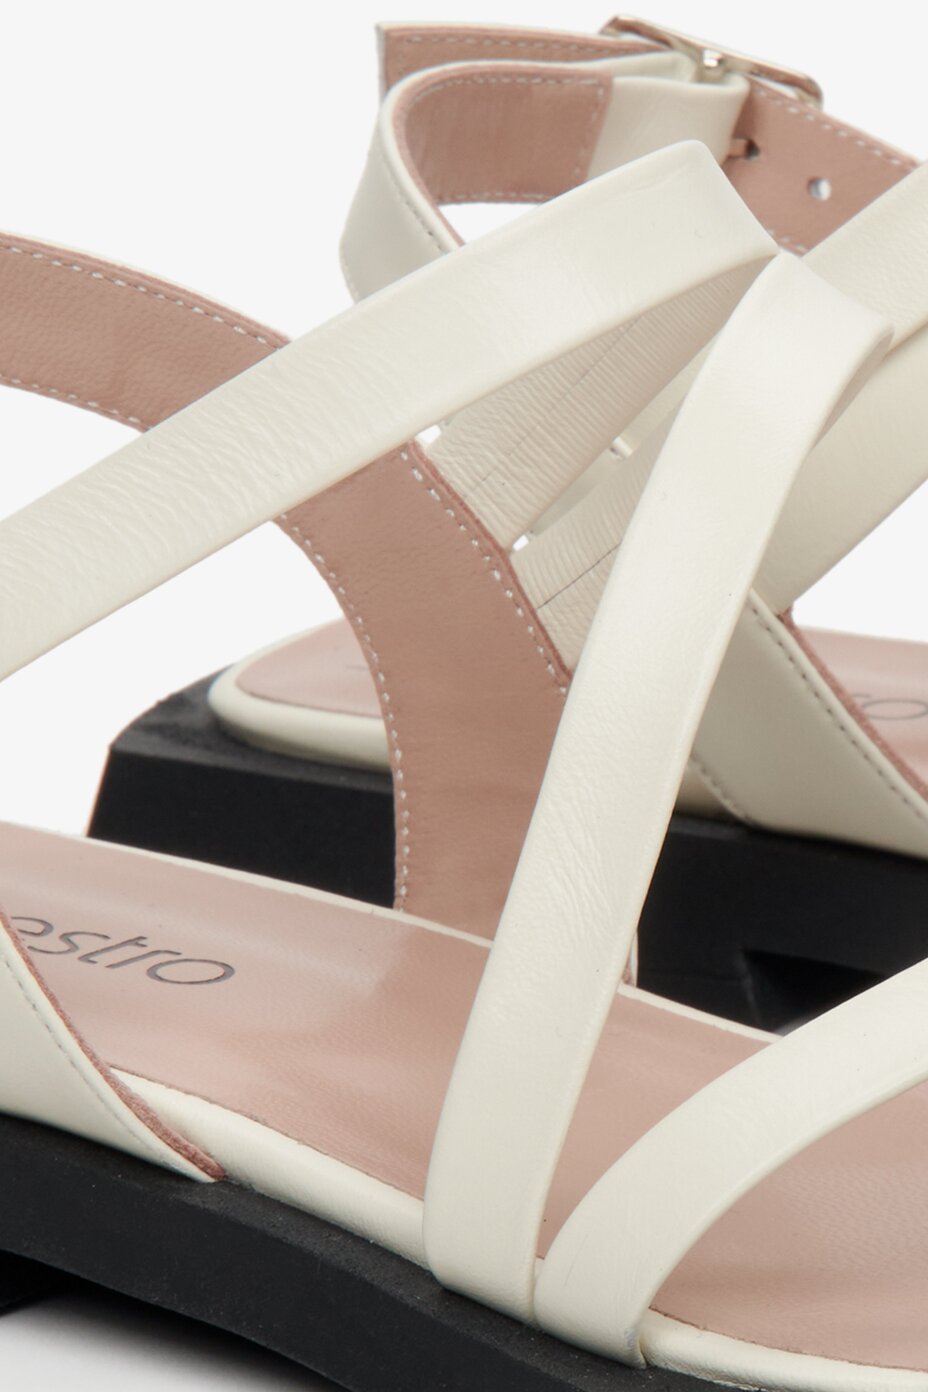 Leather, women's white sandals by Estro with thin straps - presentation of the rear part of the footwear.